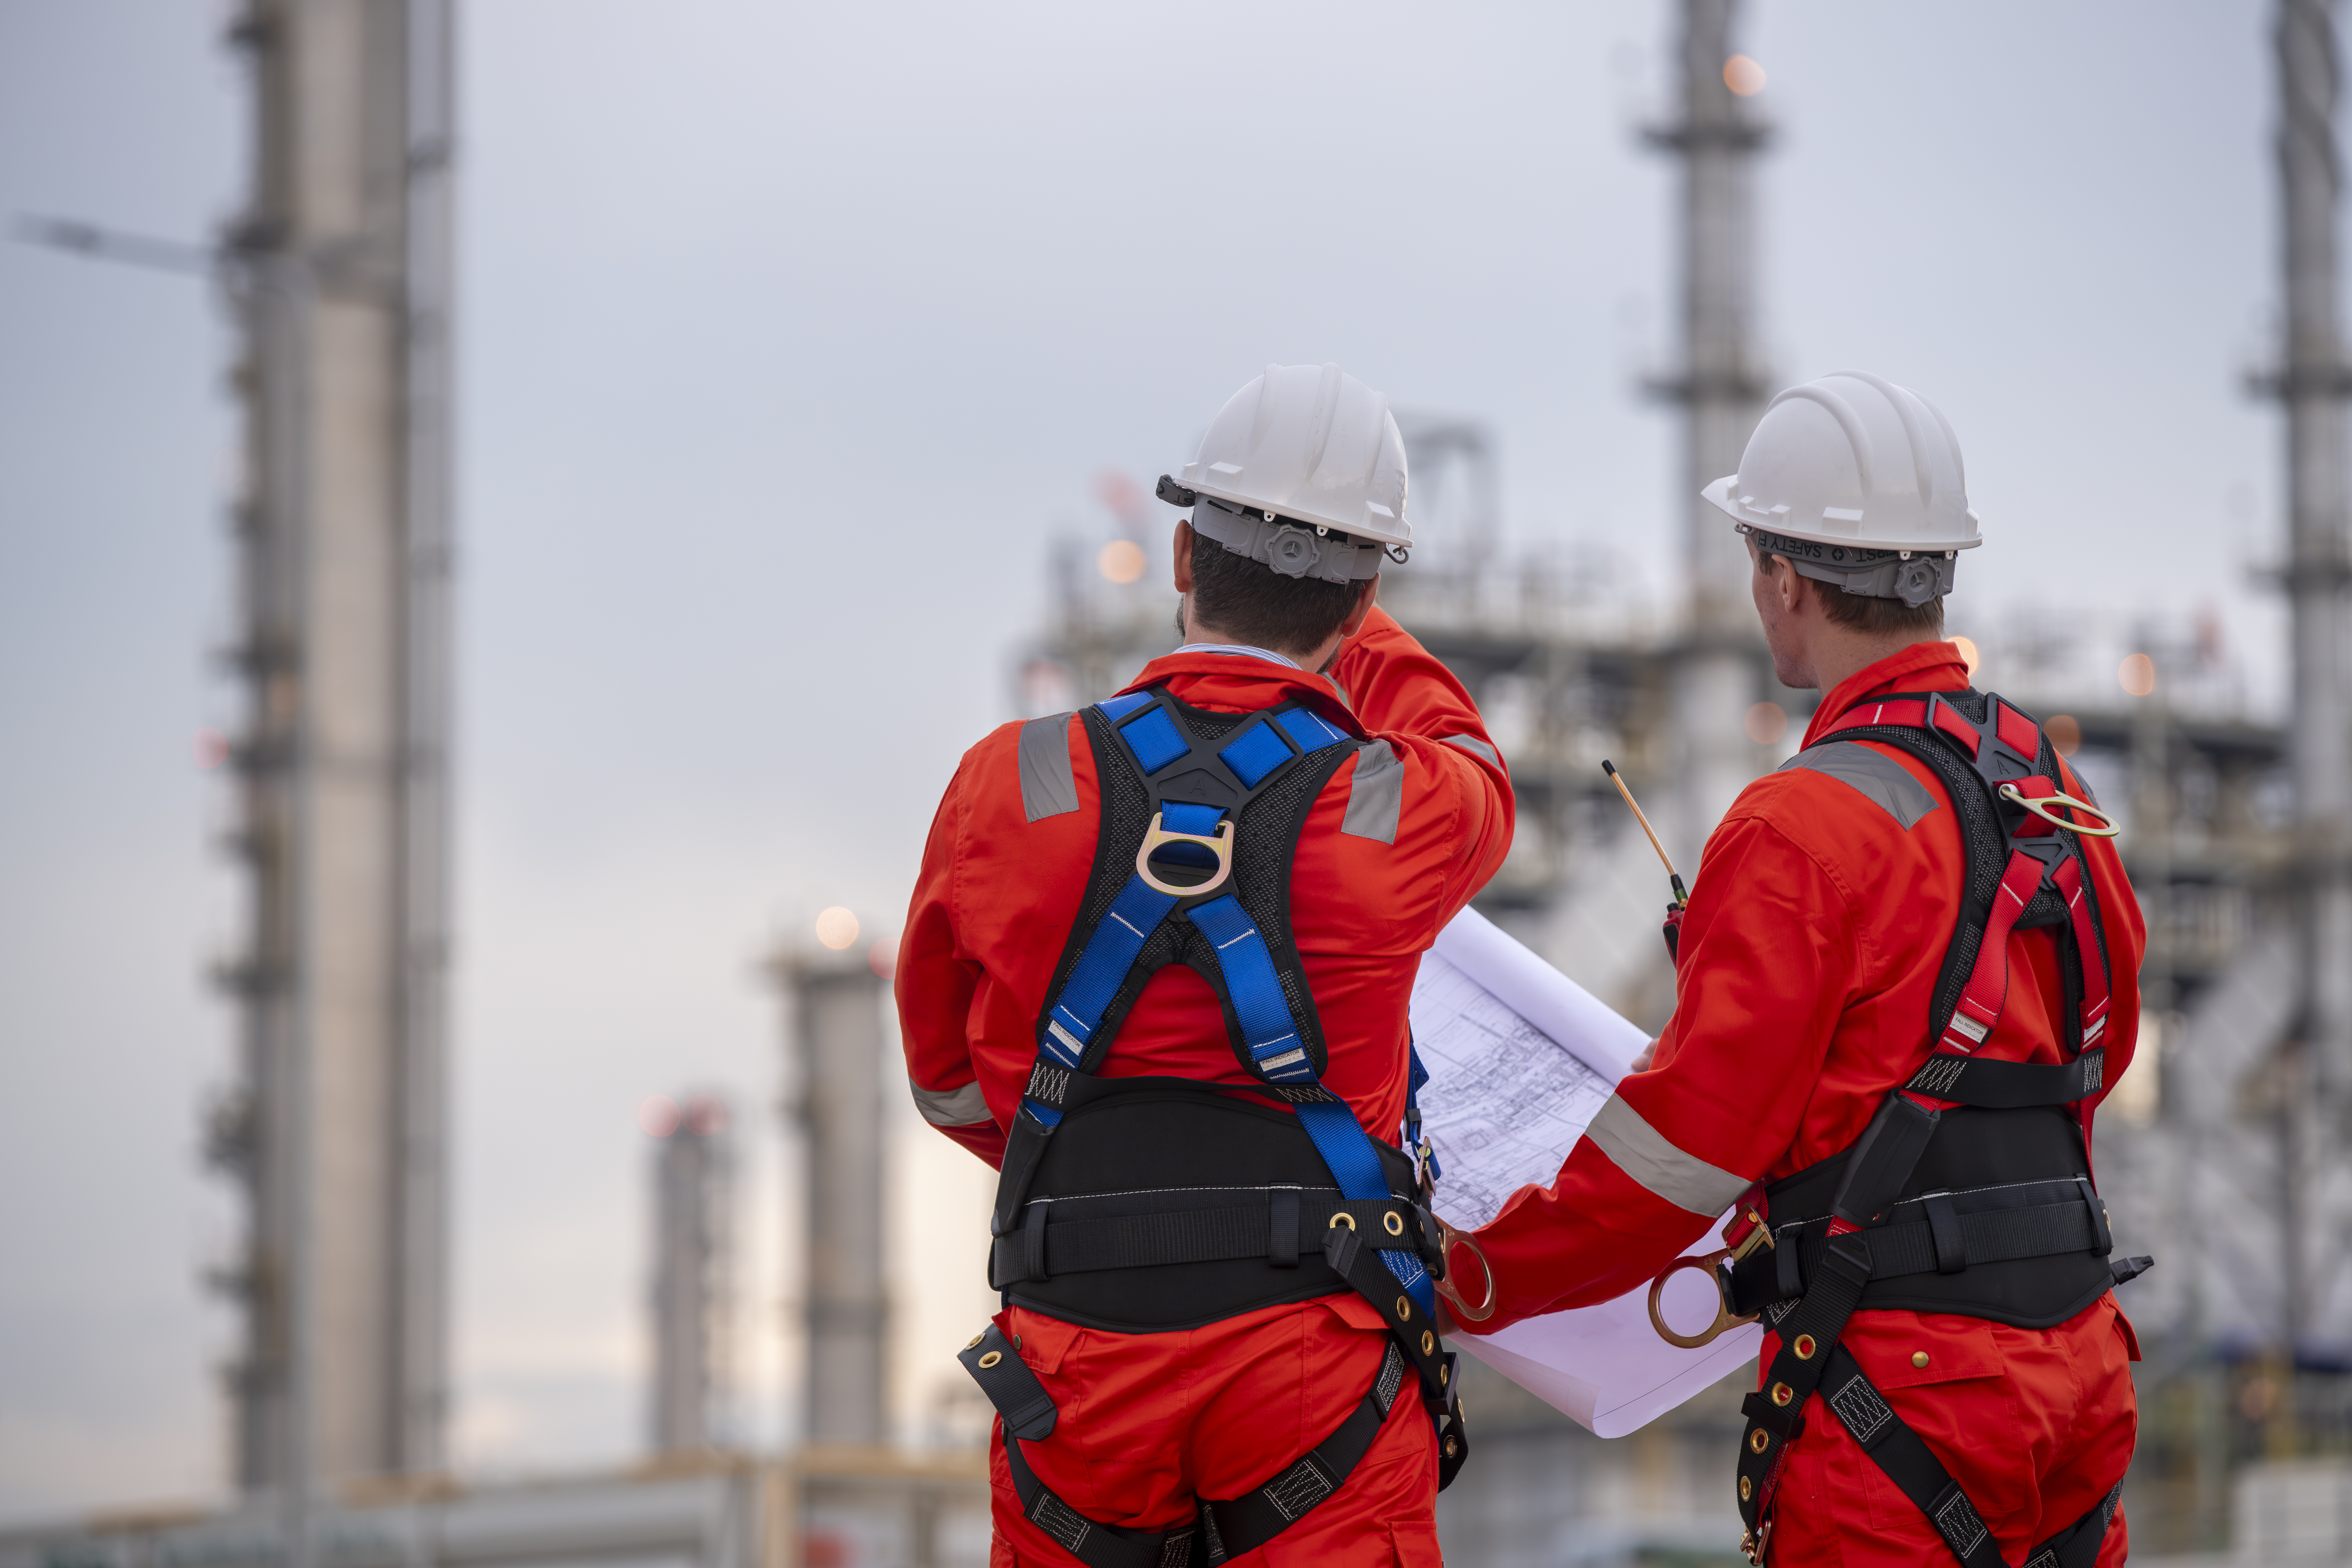 Fall Protection Solutions in the Oil and Gas